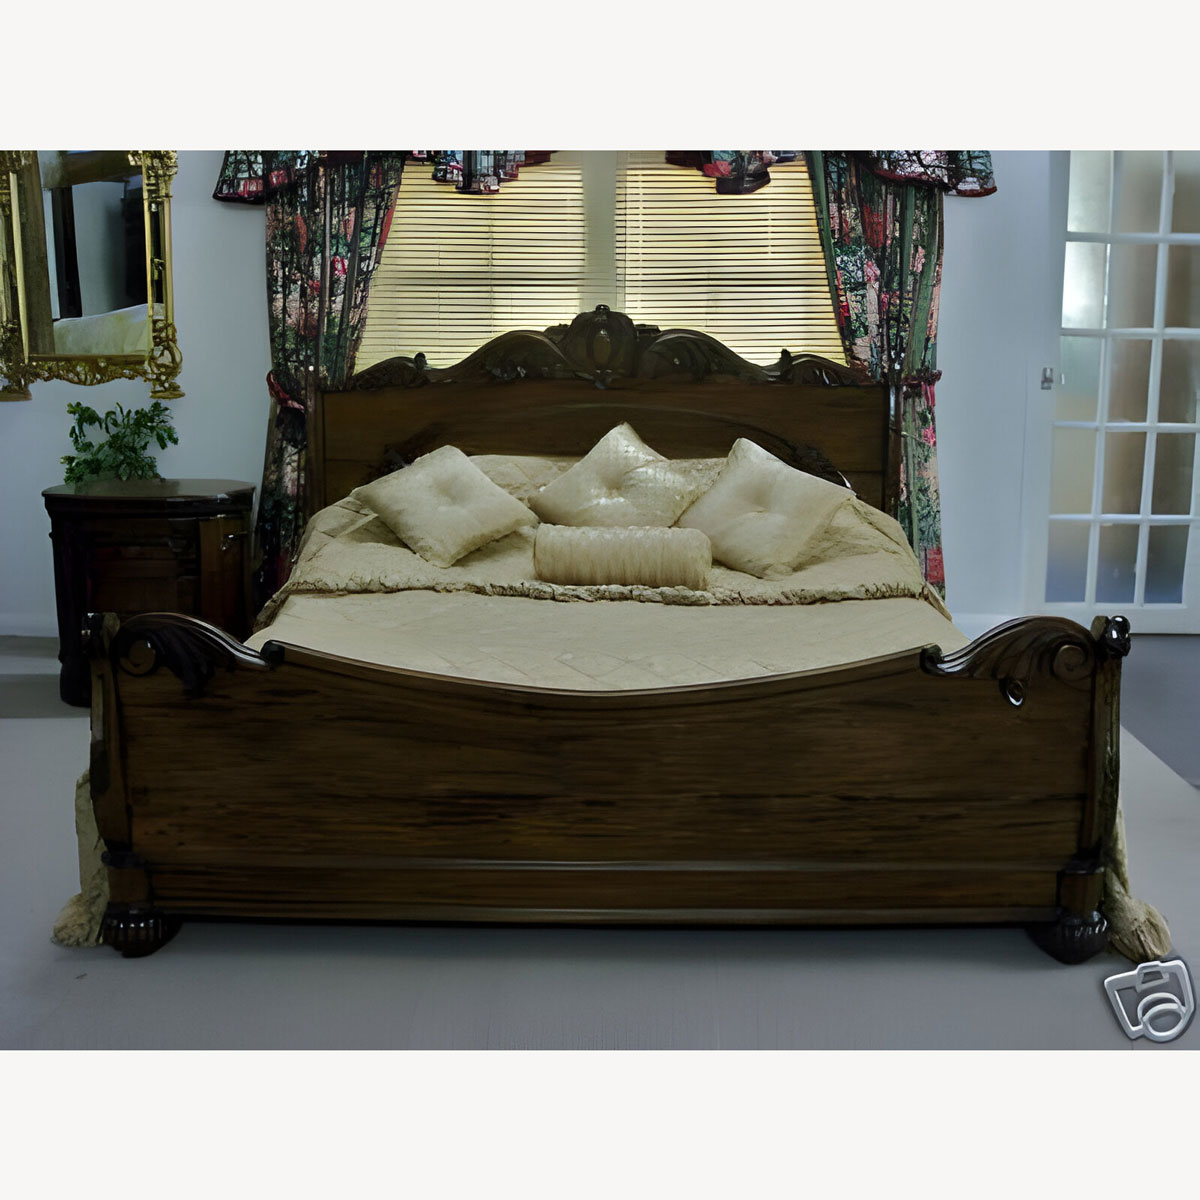 Florence Bed 1 - Hampshire Barn Interiors - Florence Bed -